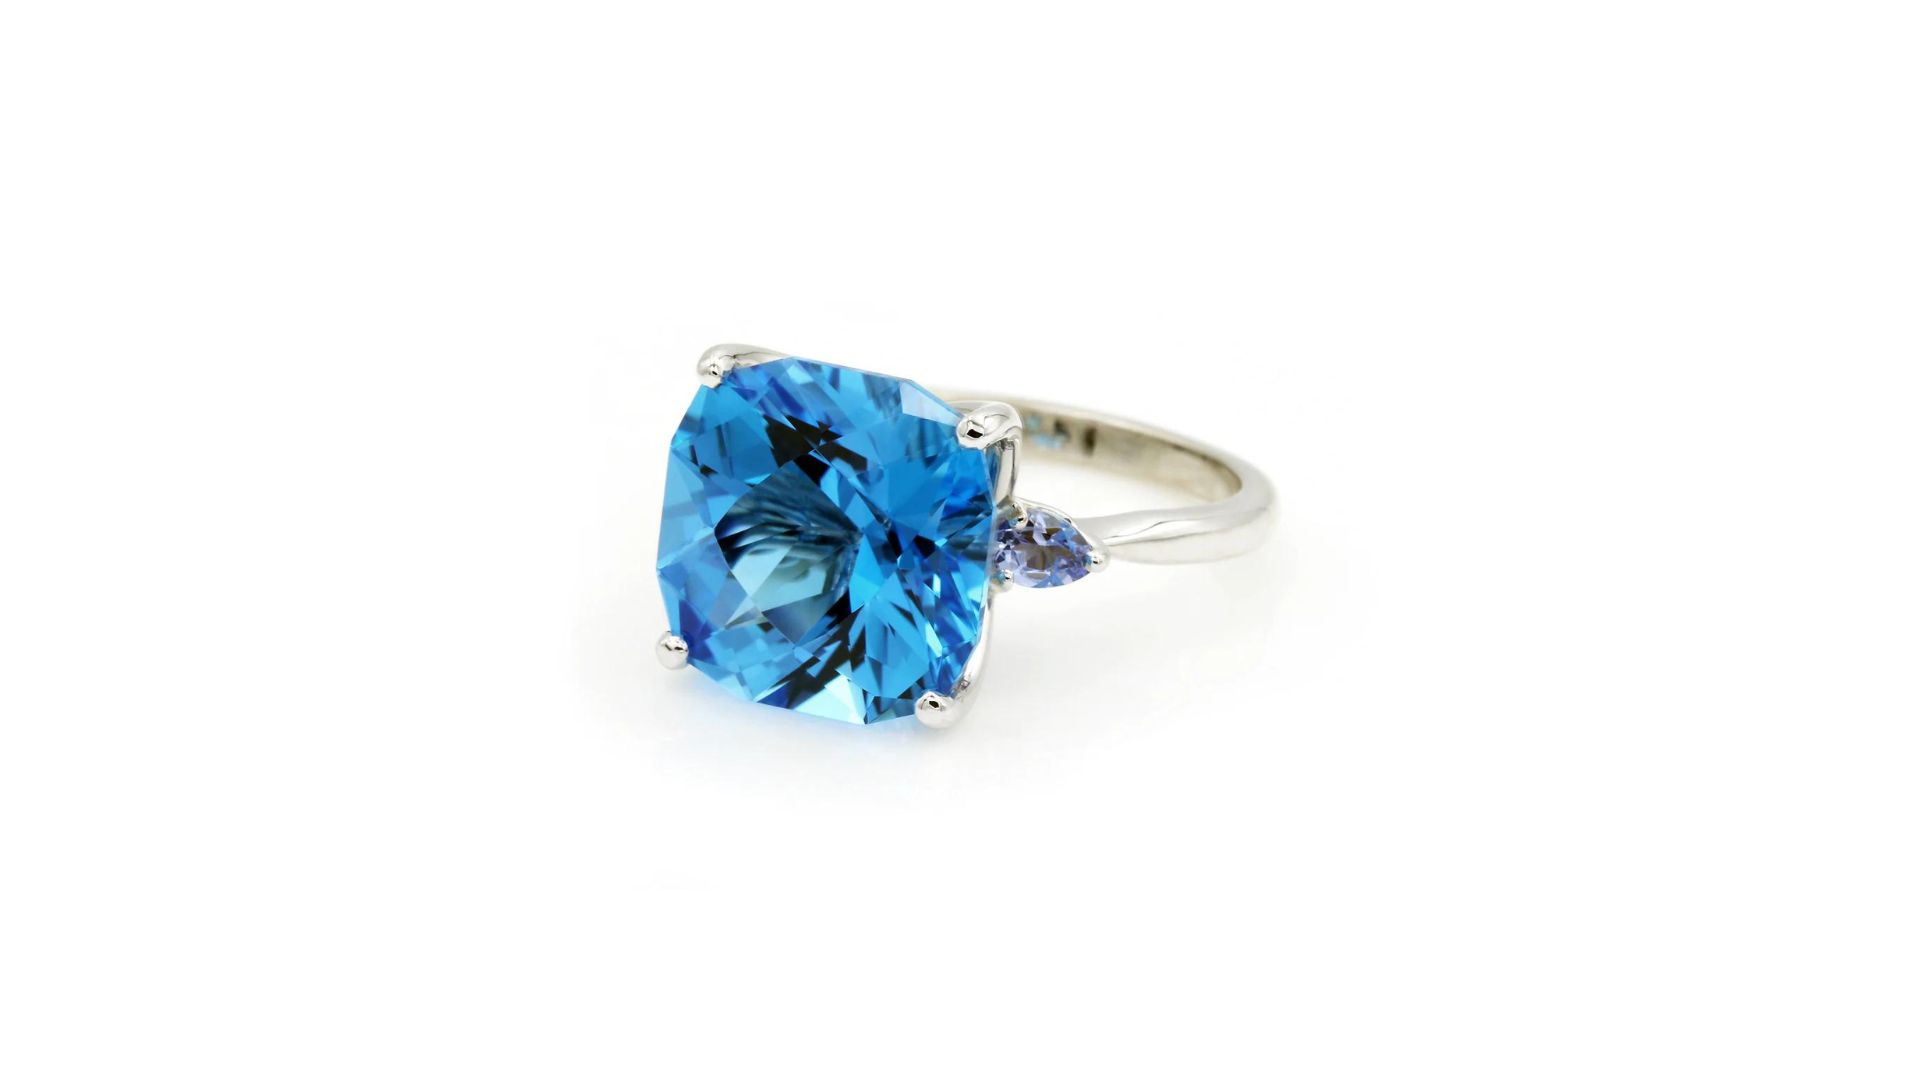 Topaz Rings - Captivating Elegance For Your Jewelry Collection